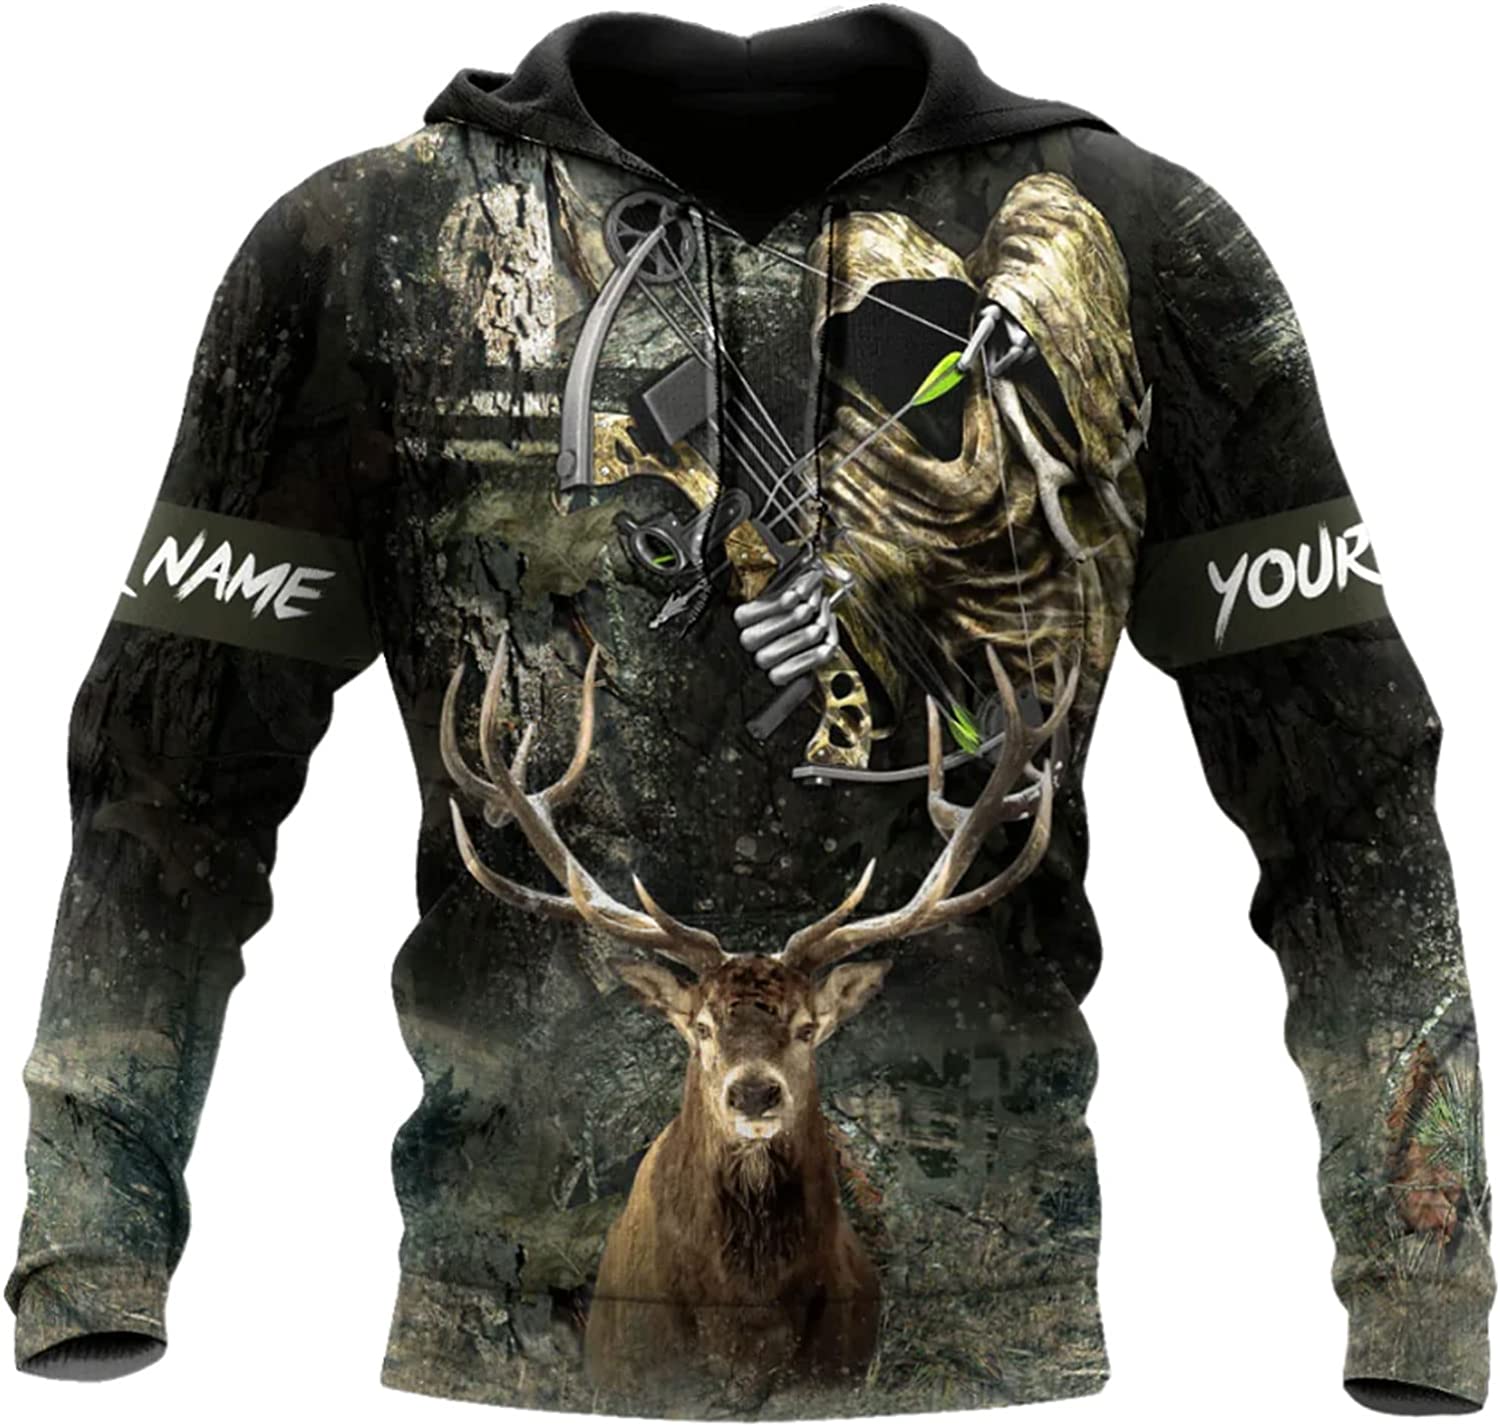 Deer Hunting Apparel for Men and Women: Custom 3D Full Print Bow, Animal Hunting Shirts, Deer Hunter Lover Gifts for Family – Choose from Pullover Hoodies, Hawaiian Shirts, and Sweatshirts. – JOT1507